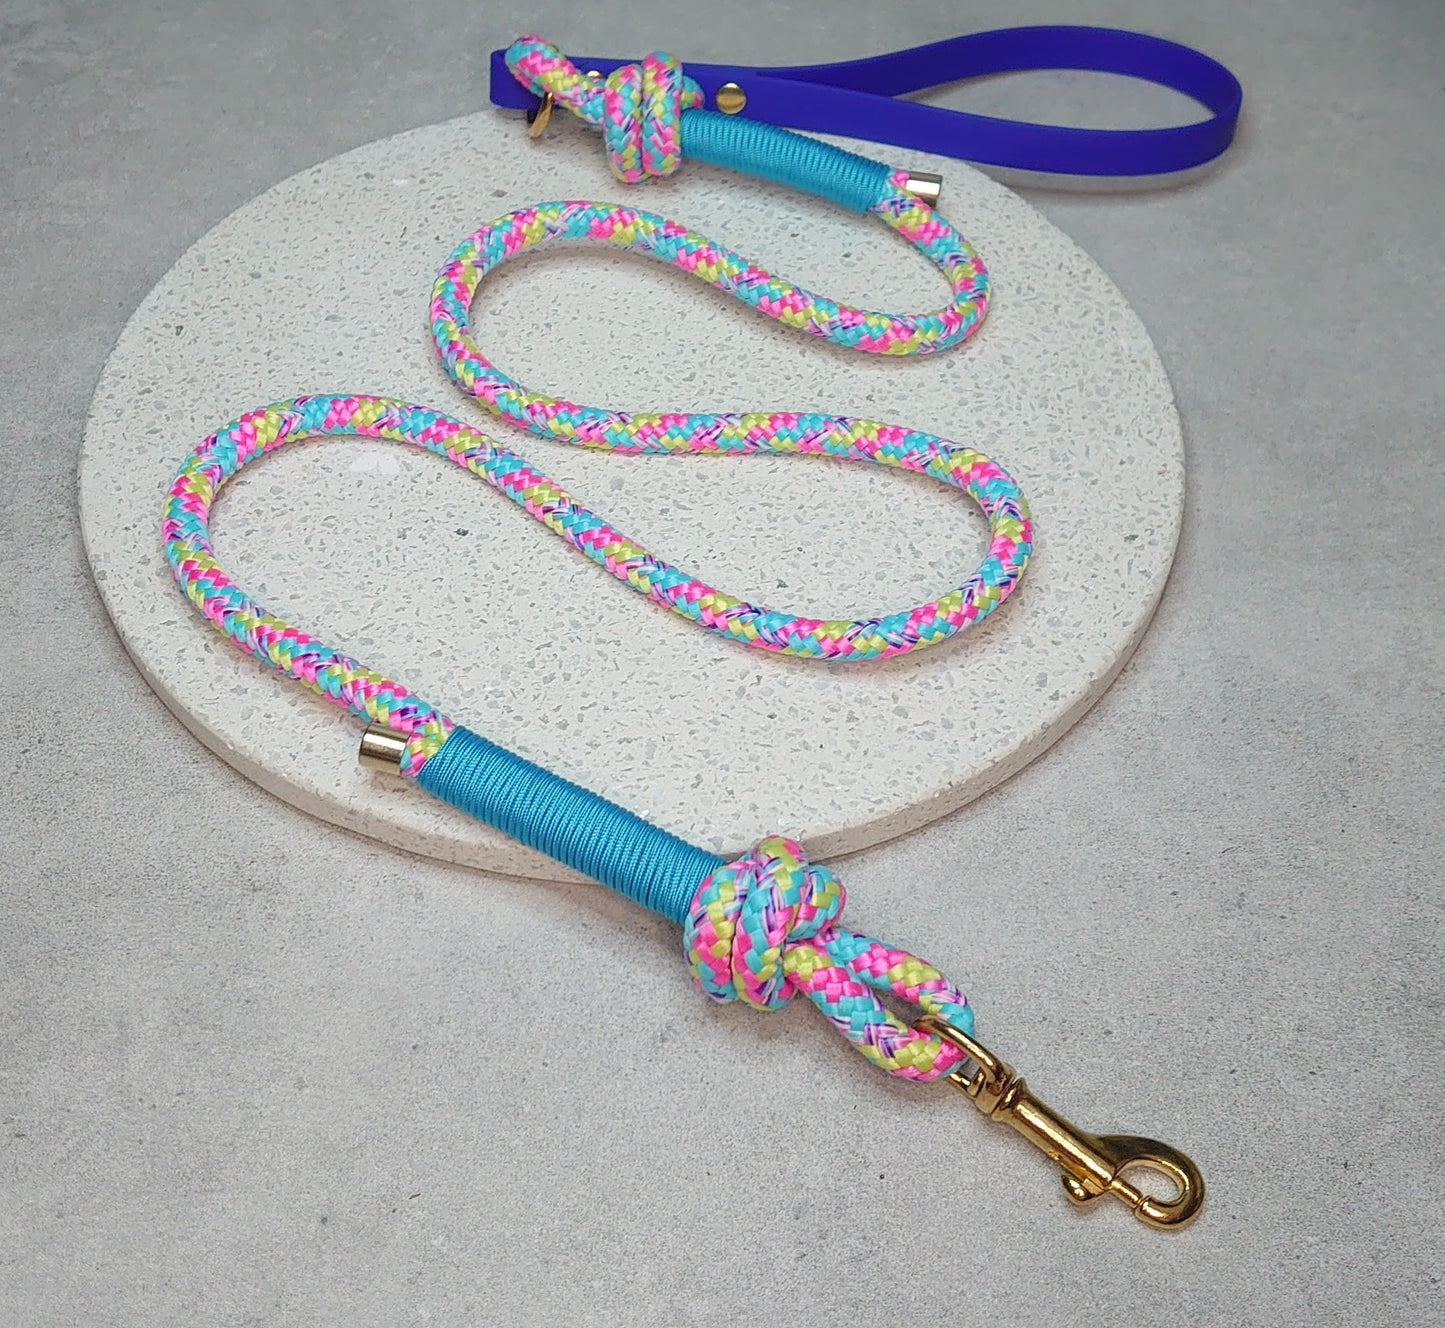 Cross knot rope lead with biothane handle - Design your own